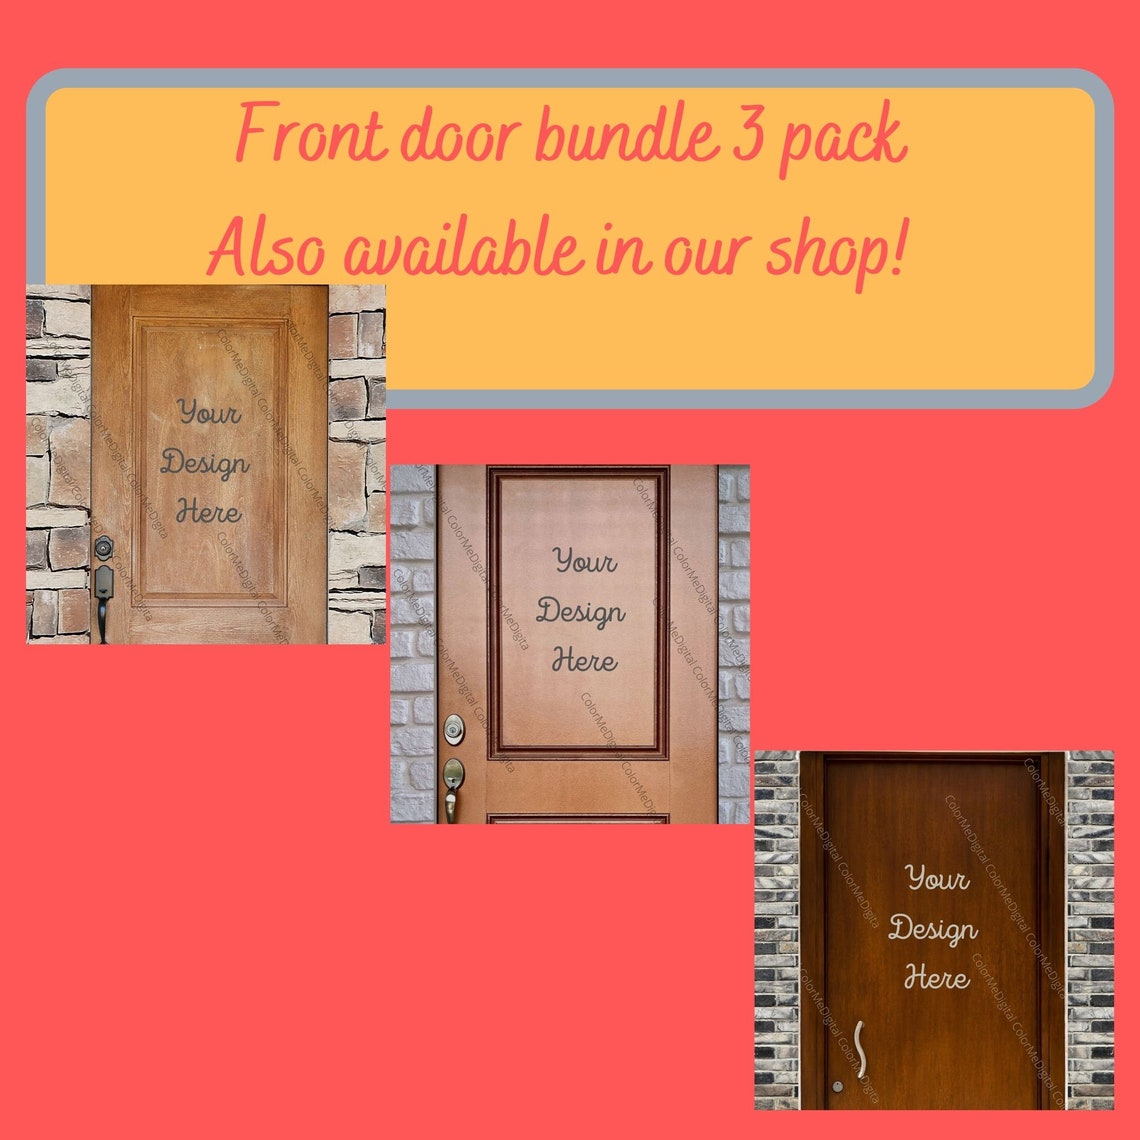 Download Front door 4 pack front door step mock up for your sign and | Etsy